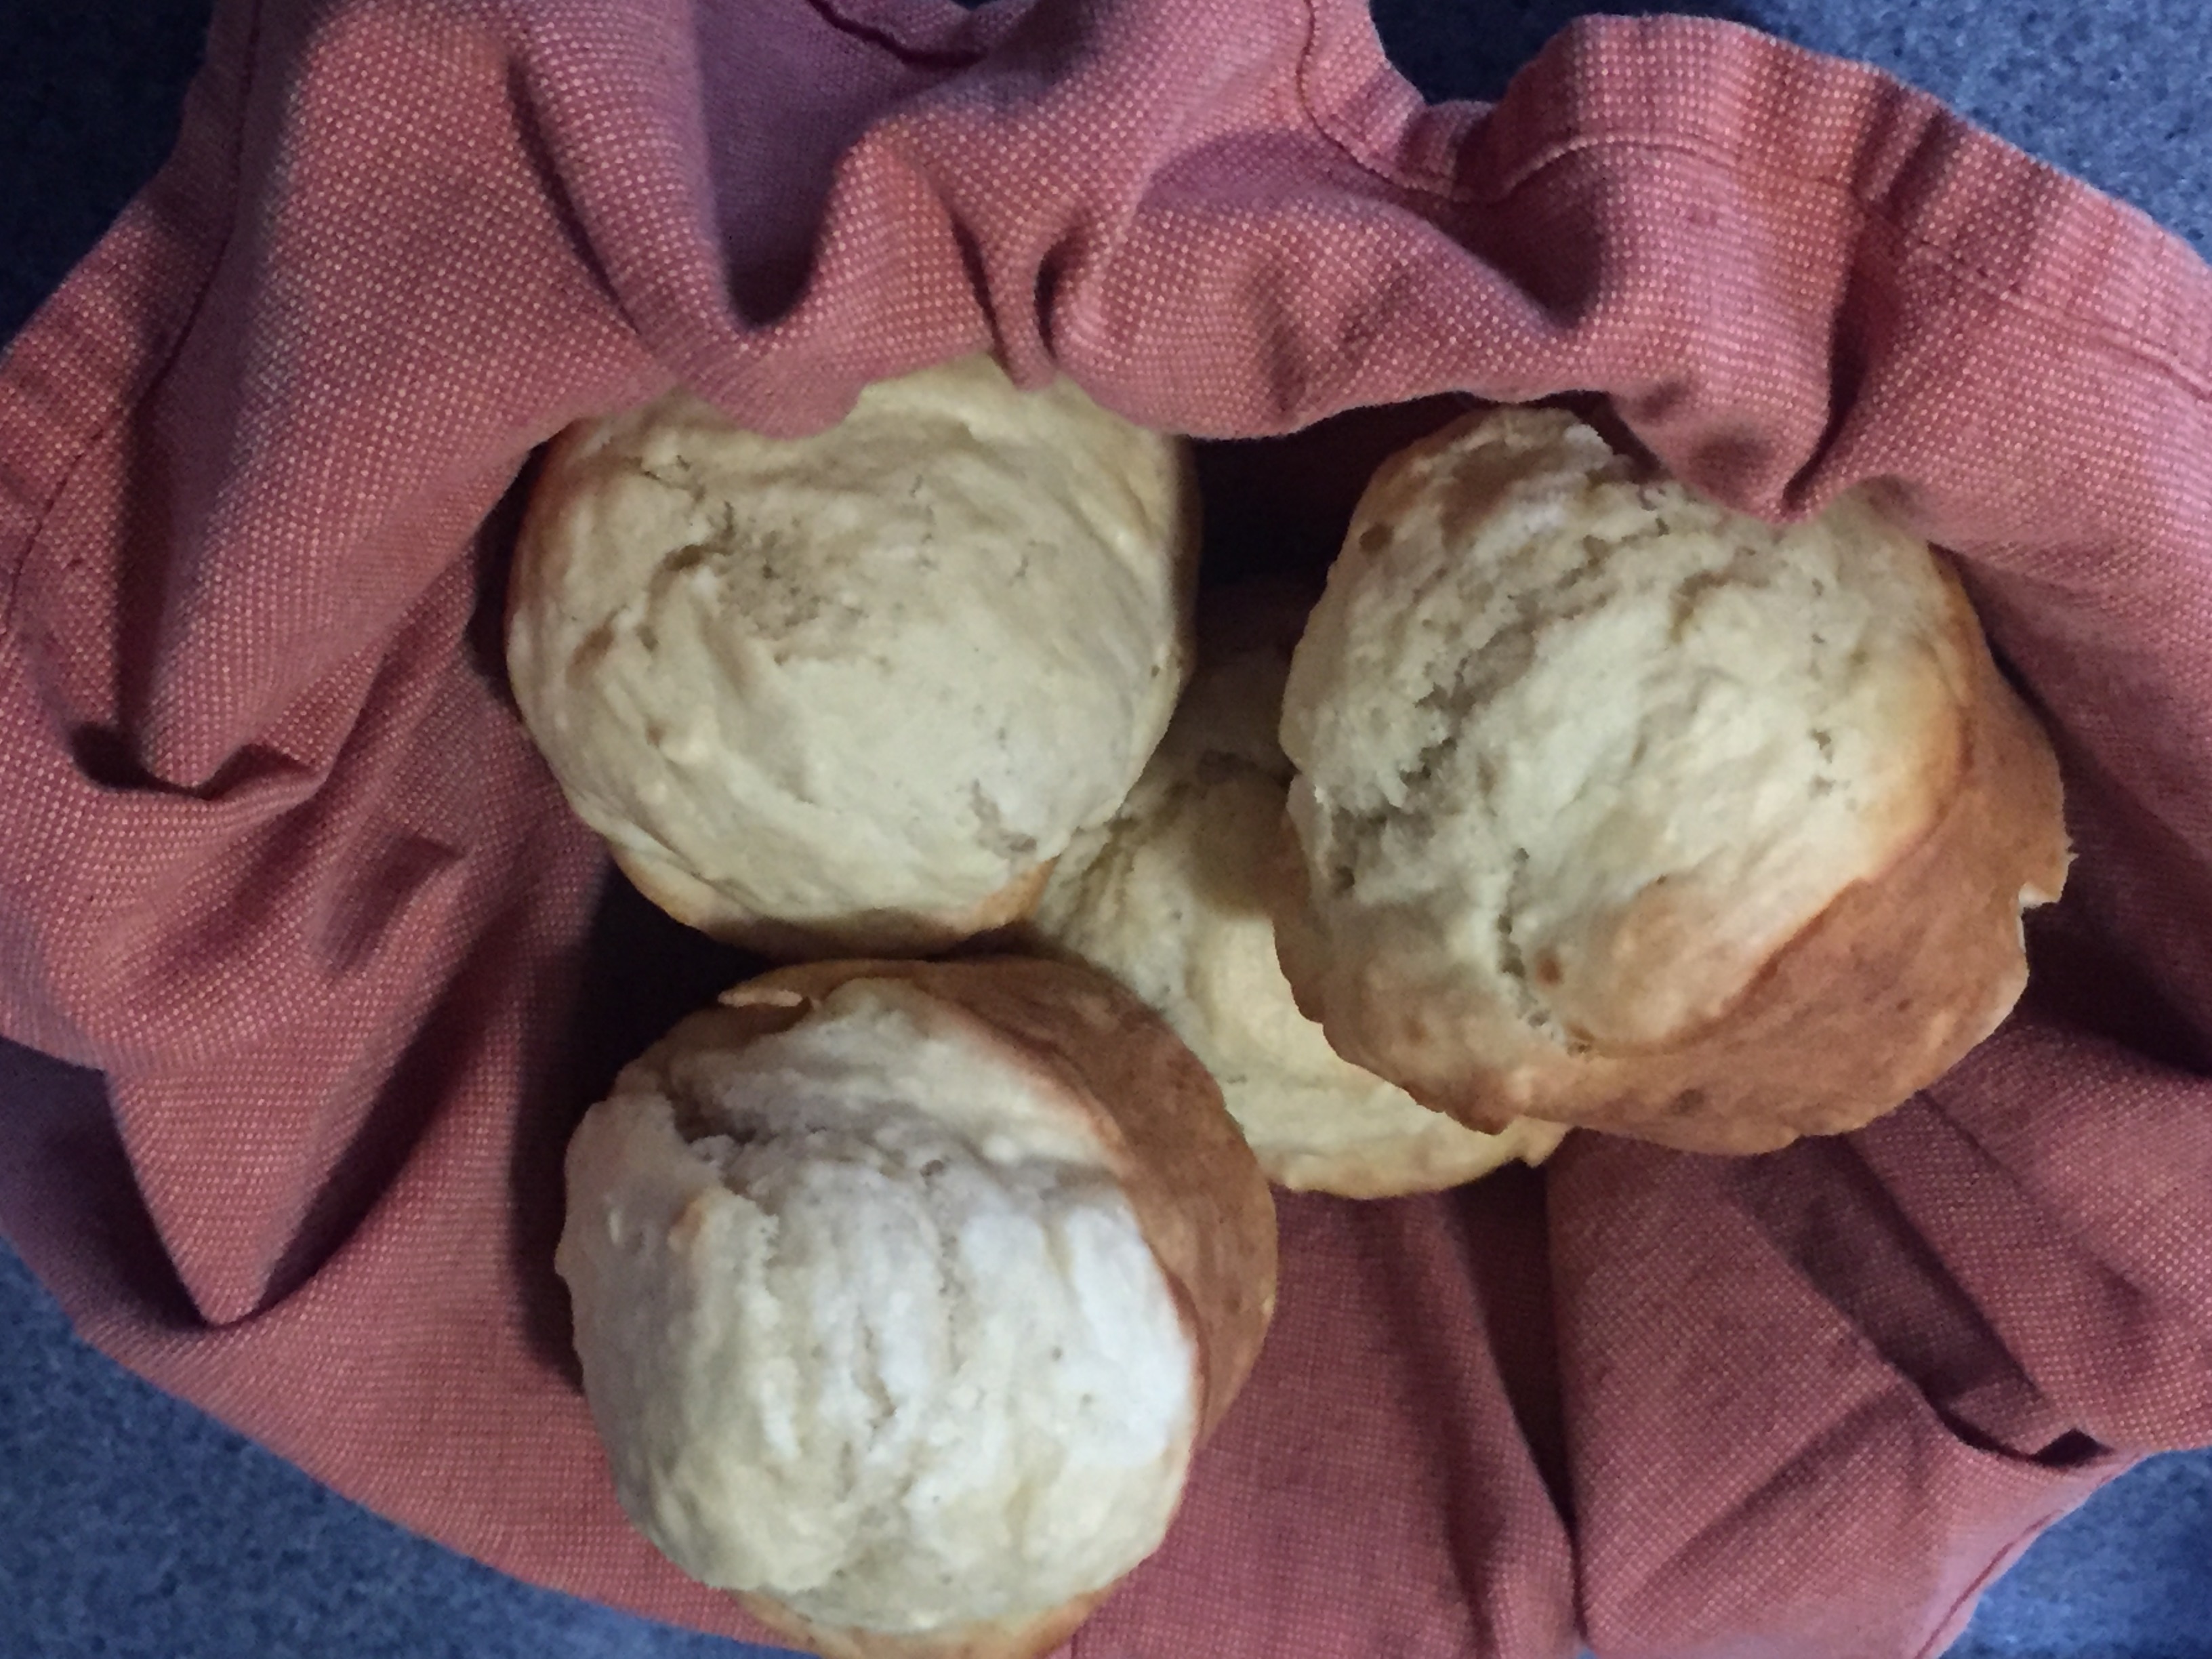 Four freshly baked muffins in a basket lined with a mauve colored cloth napkin.